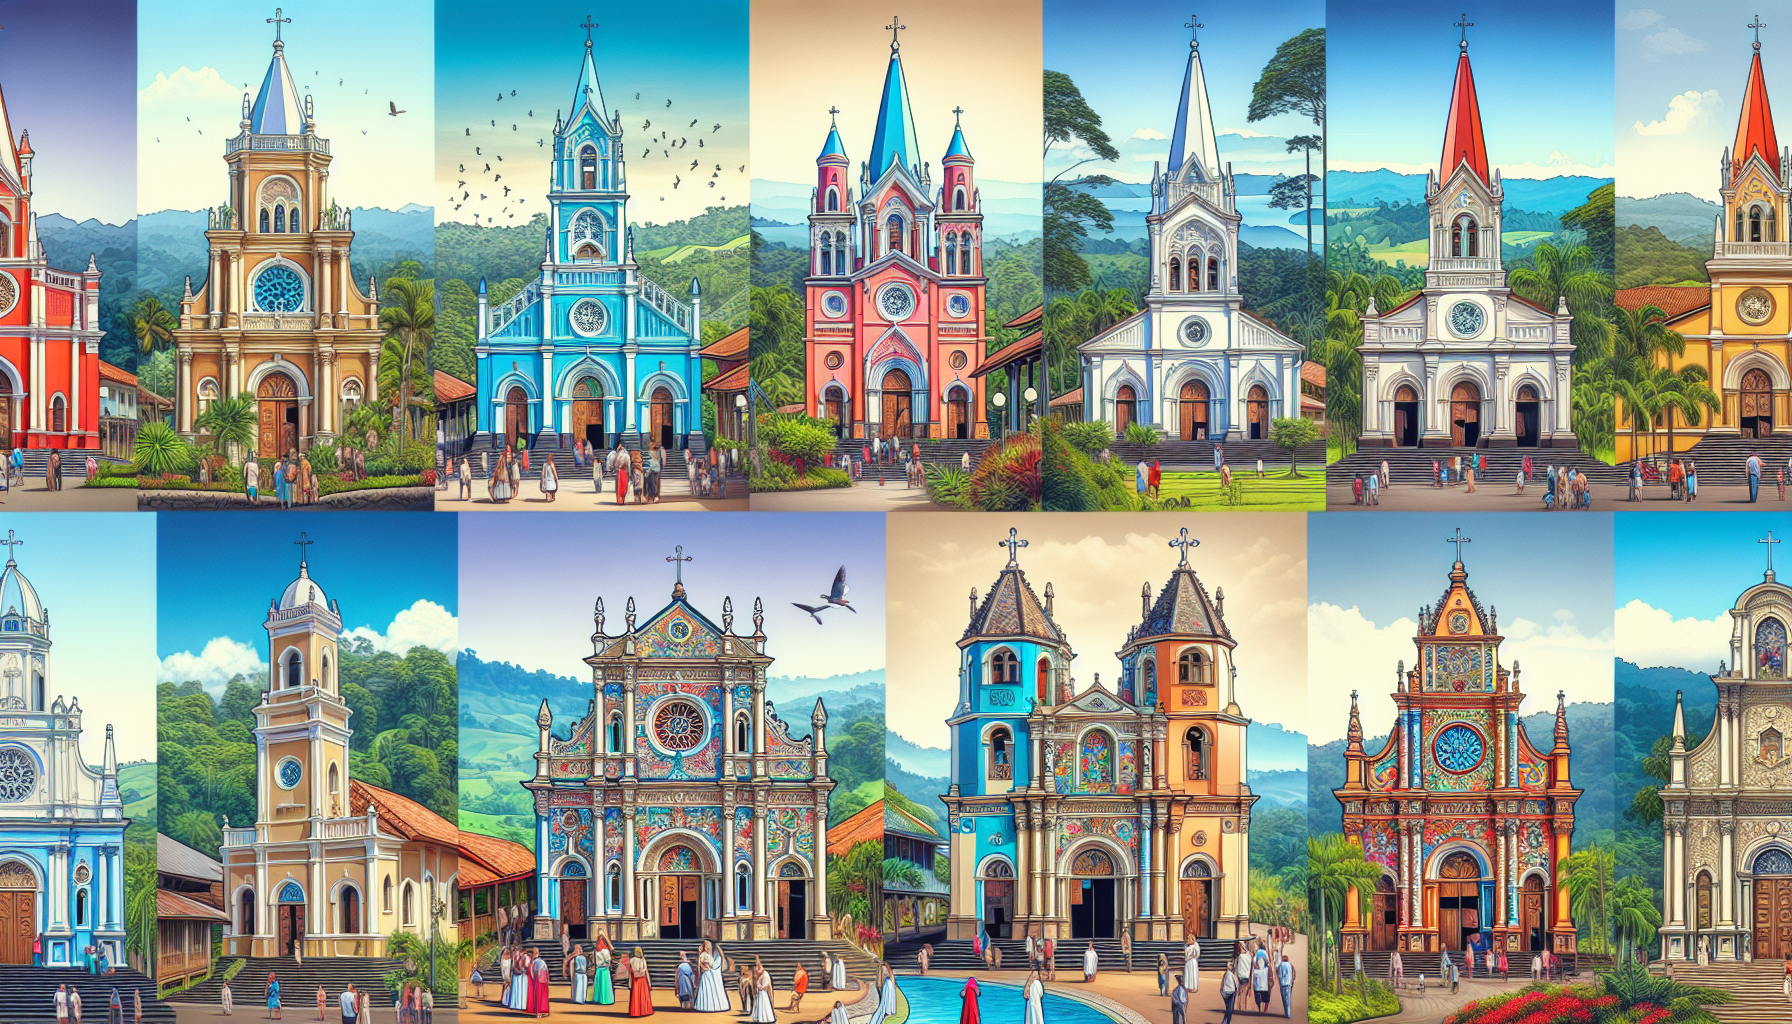 Digital artwork of stunning churches in Costa Rica, showcasing a variety of architectural styles from colonial to modern. The vibrant colors and intricate details of each church stand against the back